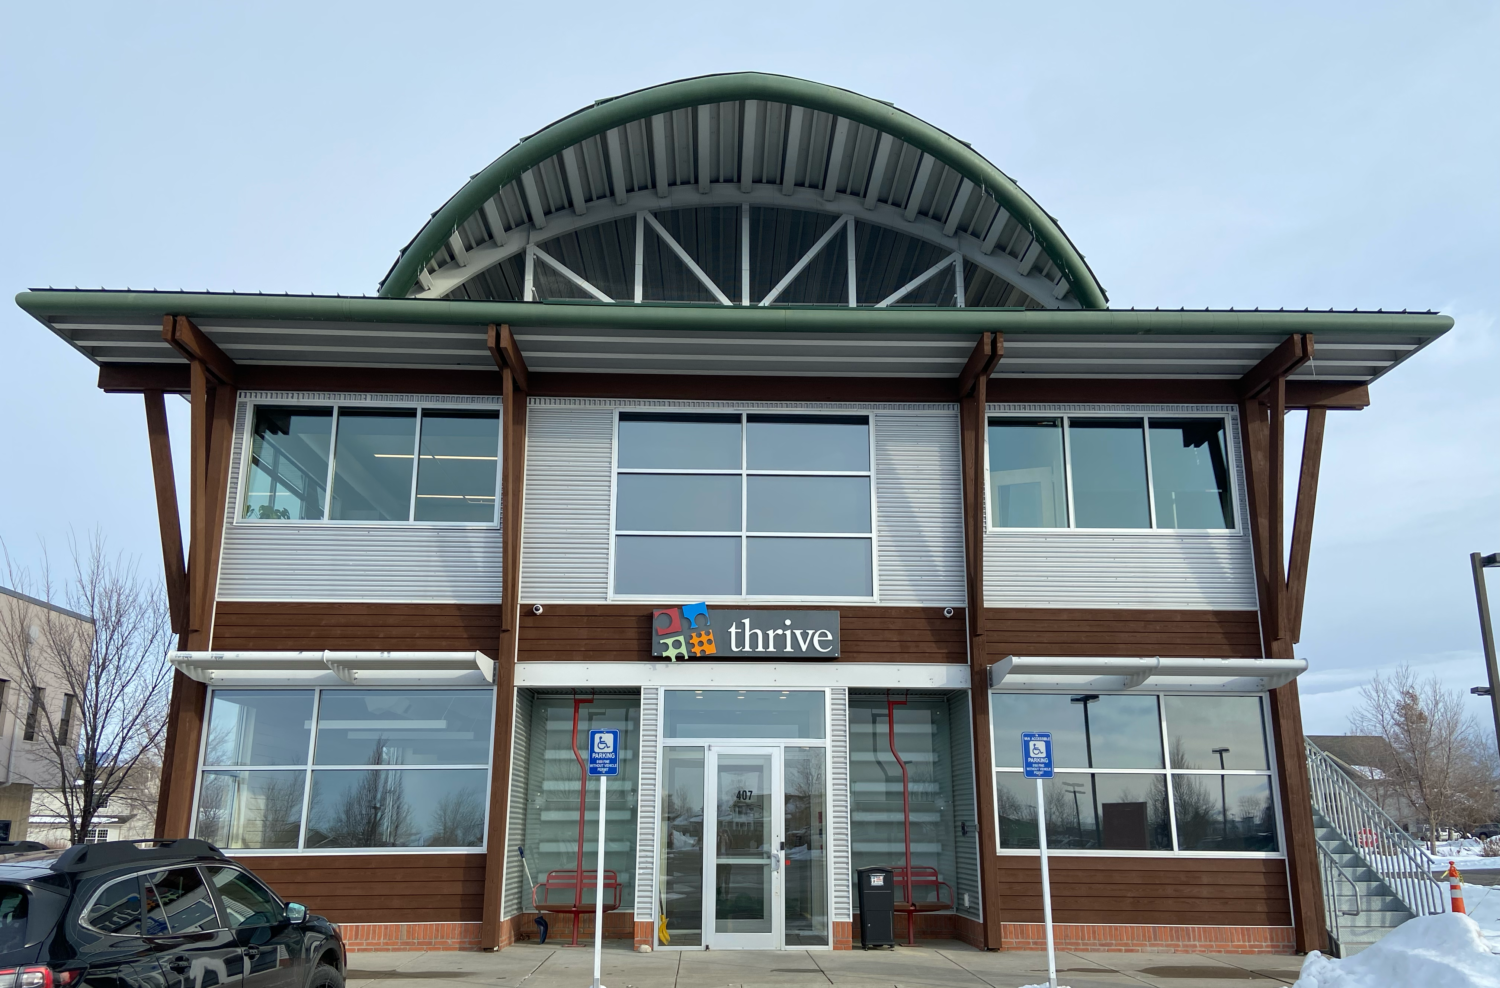 Thrive's new building front view, with the Thrive logo sign above the front door. Large metal buiding with wood accents and large panoramic windows.